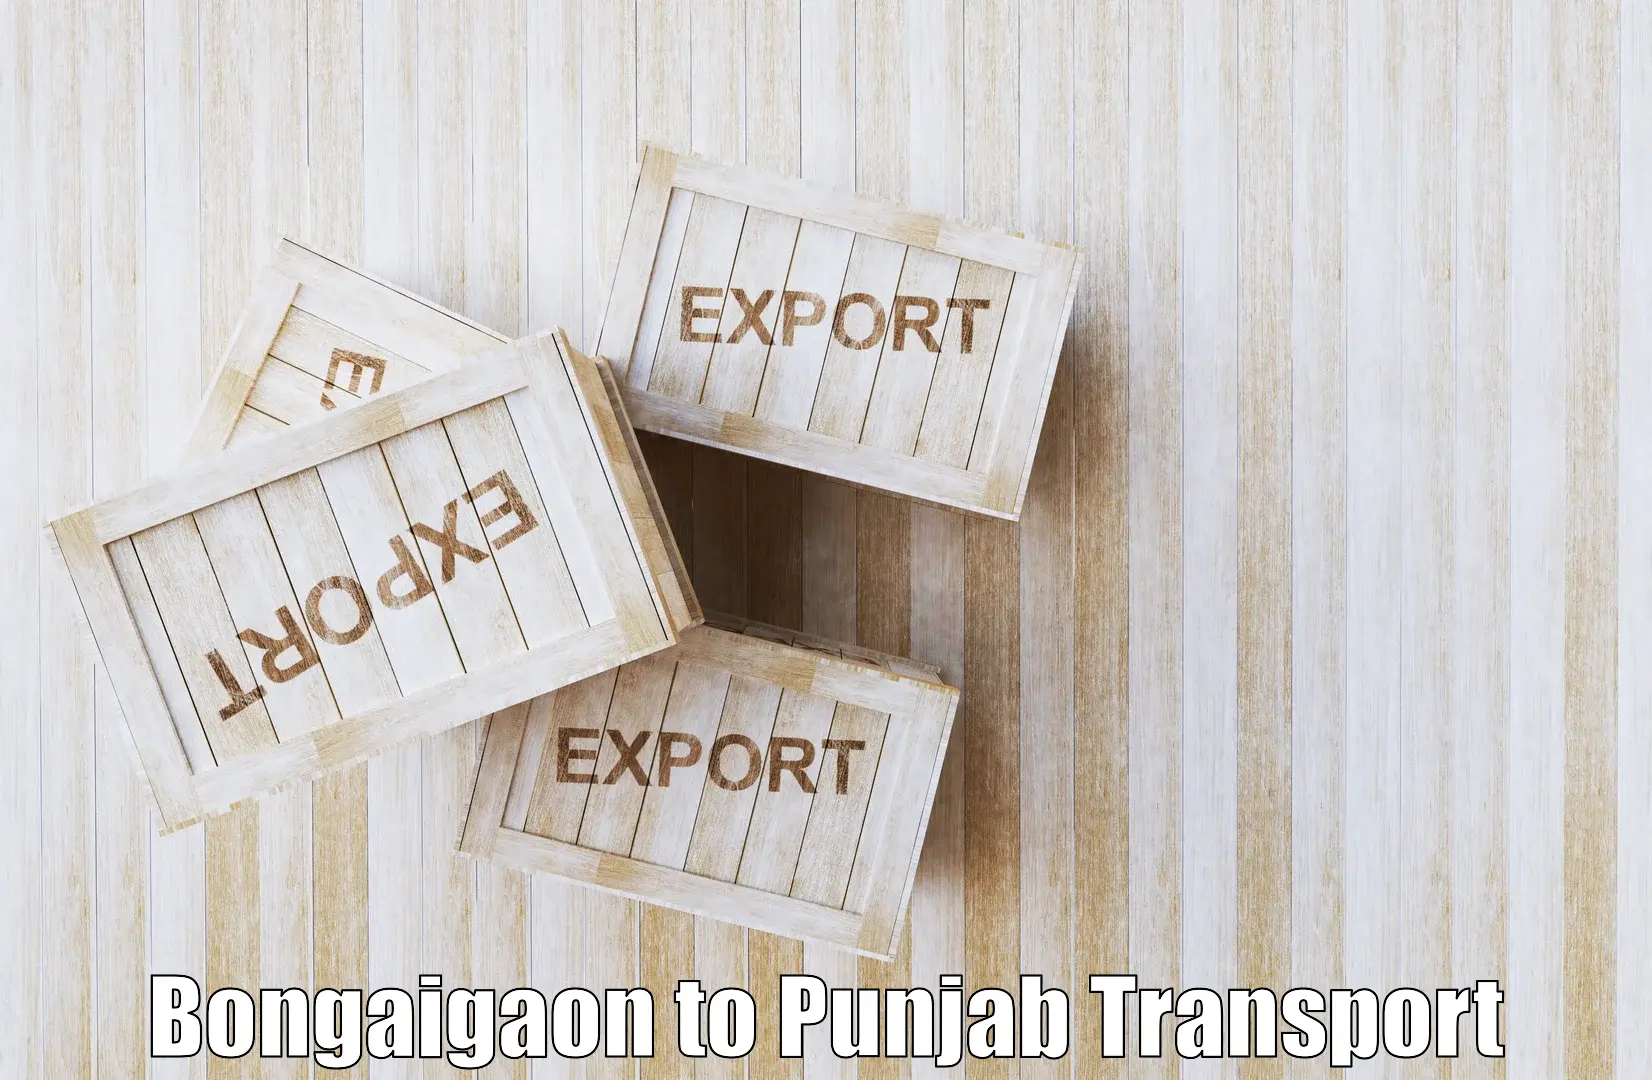 Transport bike from one state to another Bongaigaon to Ludhiana